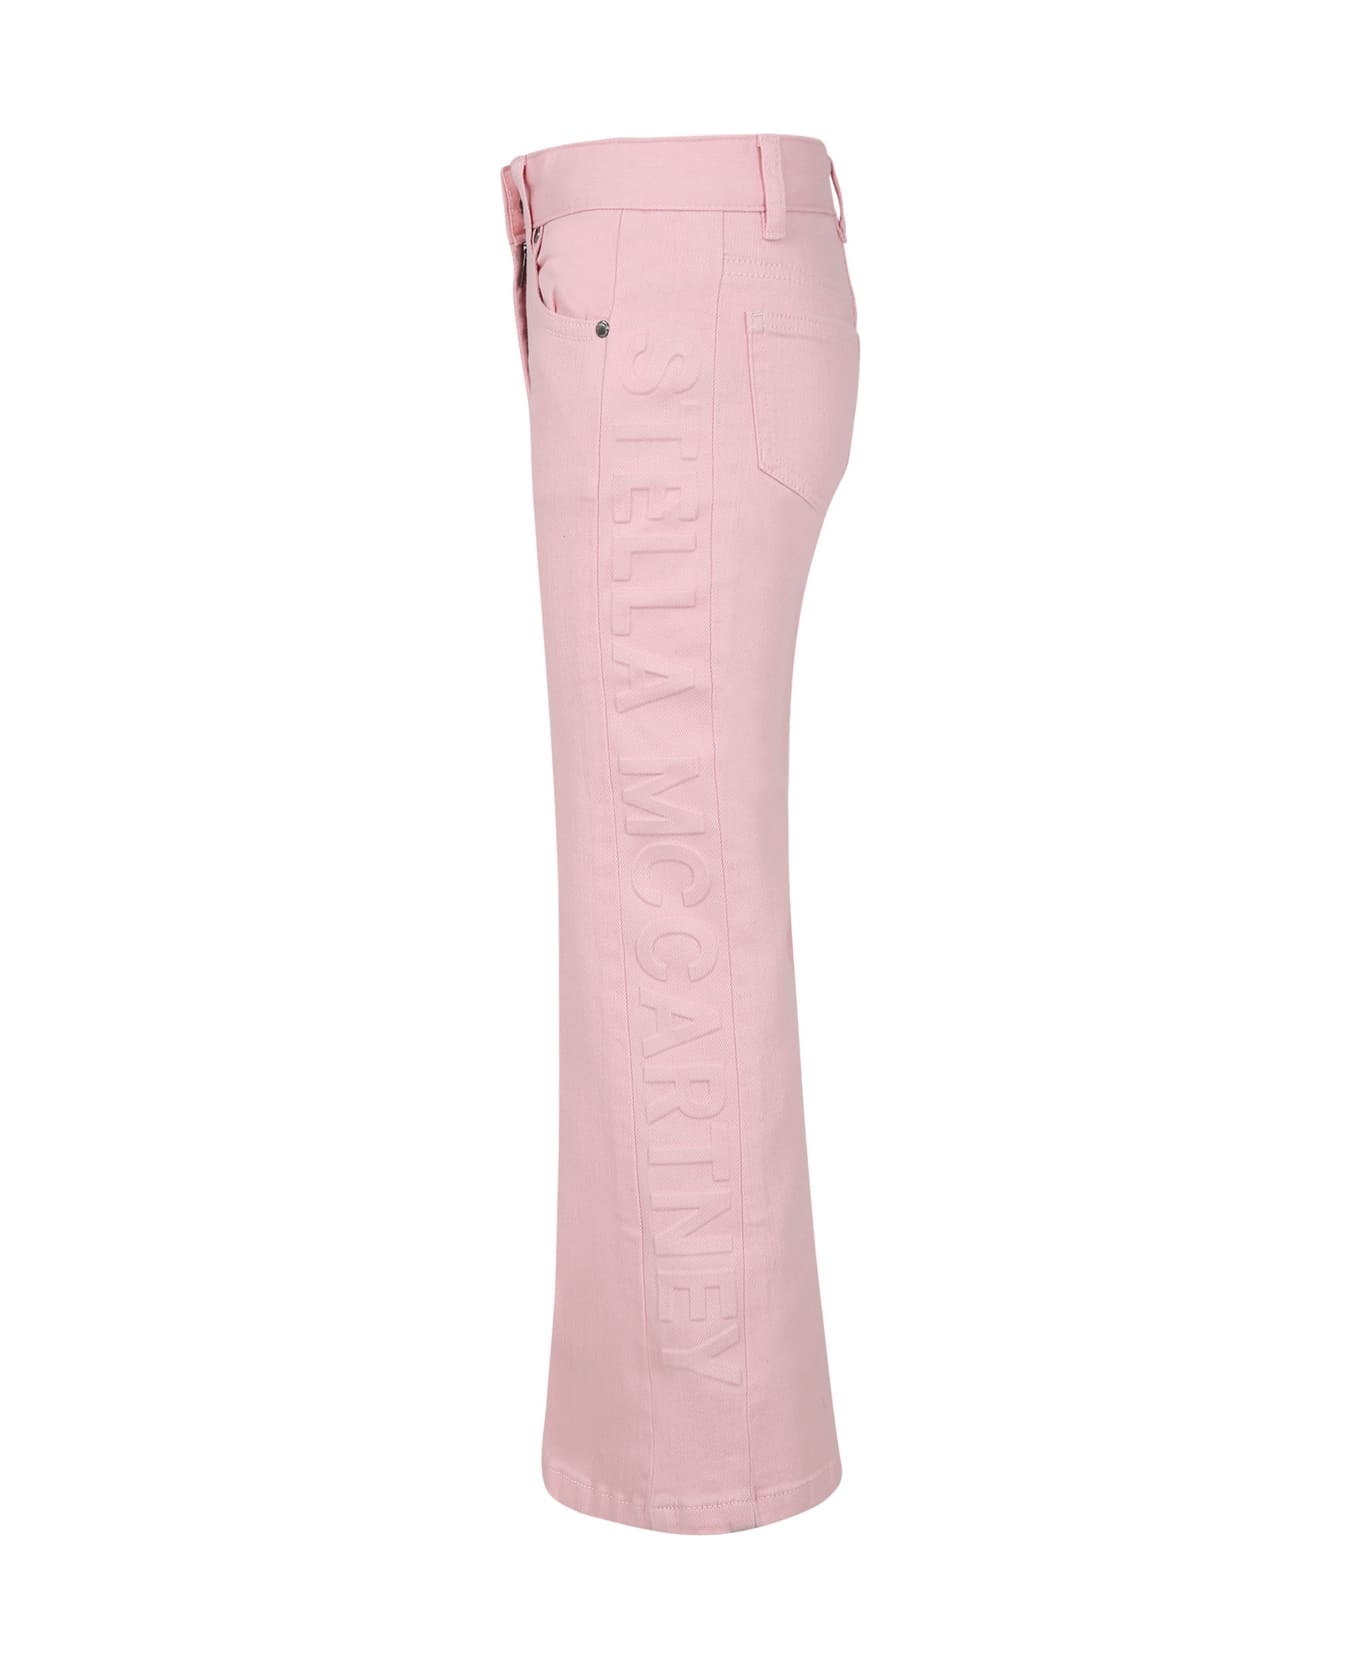 Stella McCartney Kids Pink Jeans For Girl With Logo - Pink